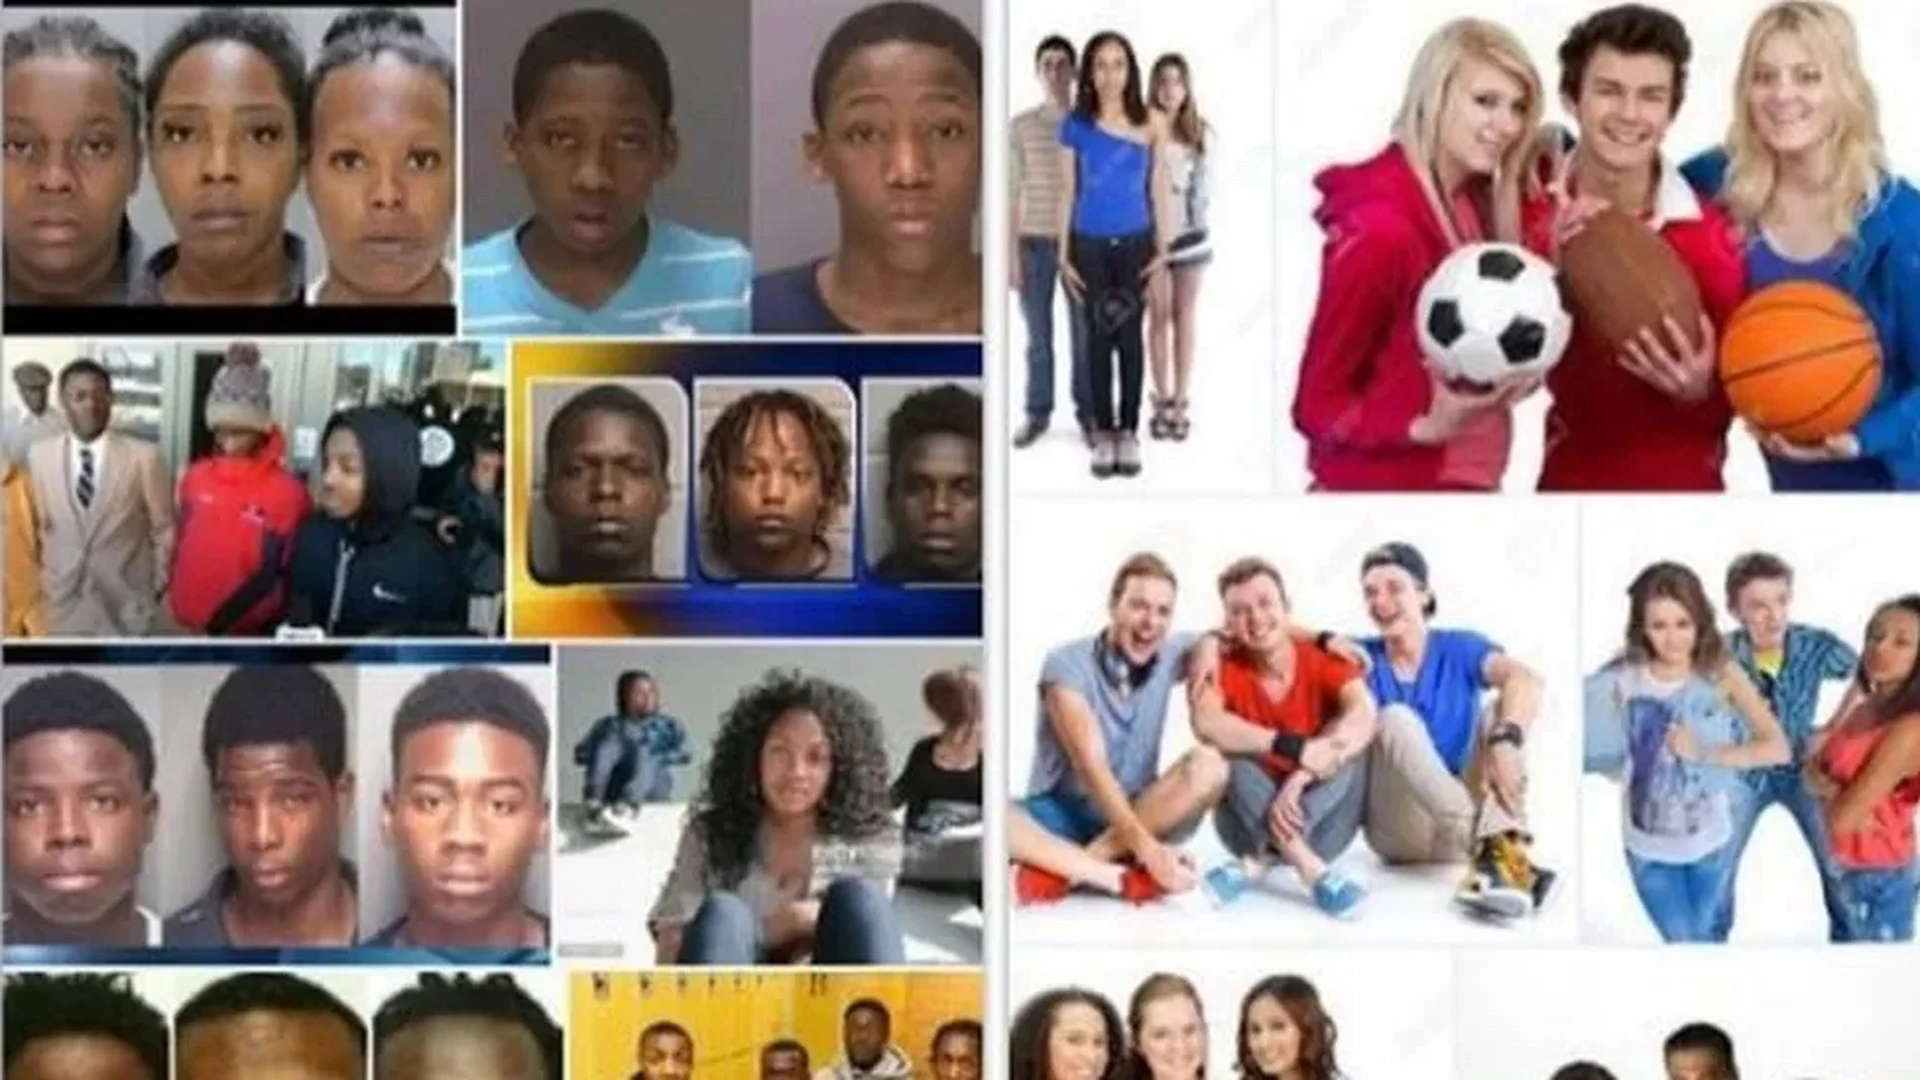 Google image search results for “Three black teenagers” versus for “Three white teenagers” show racial biases as the photos of black teenagers are predominantly mugshots. The incident data associated with this event would be the images returned exhibiting racial bias for both queries, along with additional labels for images within the search results indicating whether the images are mugshots. With the labels in hand, it is possible to codify in data the requirement that mugshots be returned with equal frequency for queries about black versus white people. While this incident can potentially be placed into the edge case data, Google chose to treat a related incident wherein black people could be labeled as gorillas as scope data by prohibiting the search and labeling of gorillas entirely.